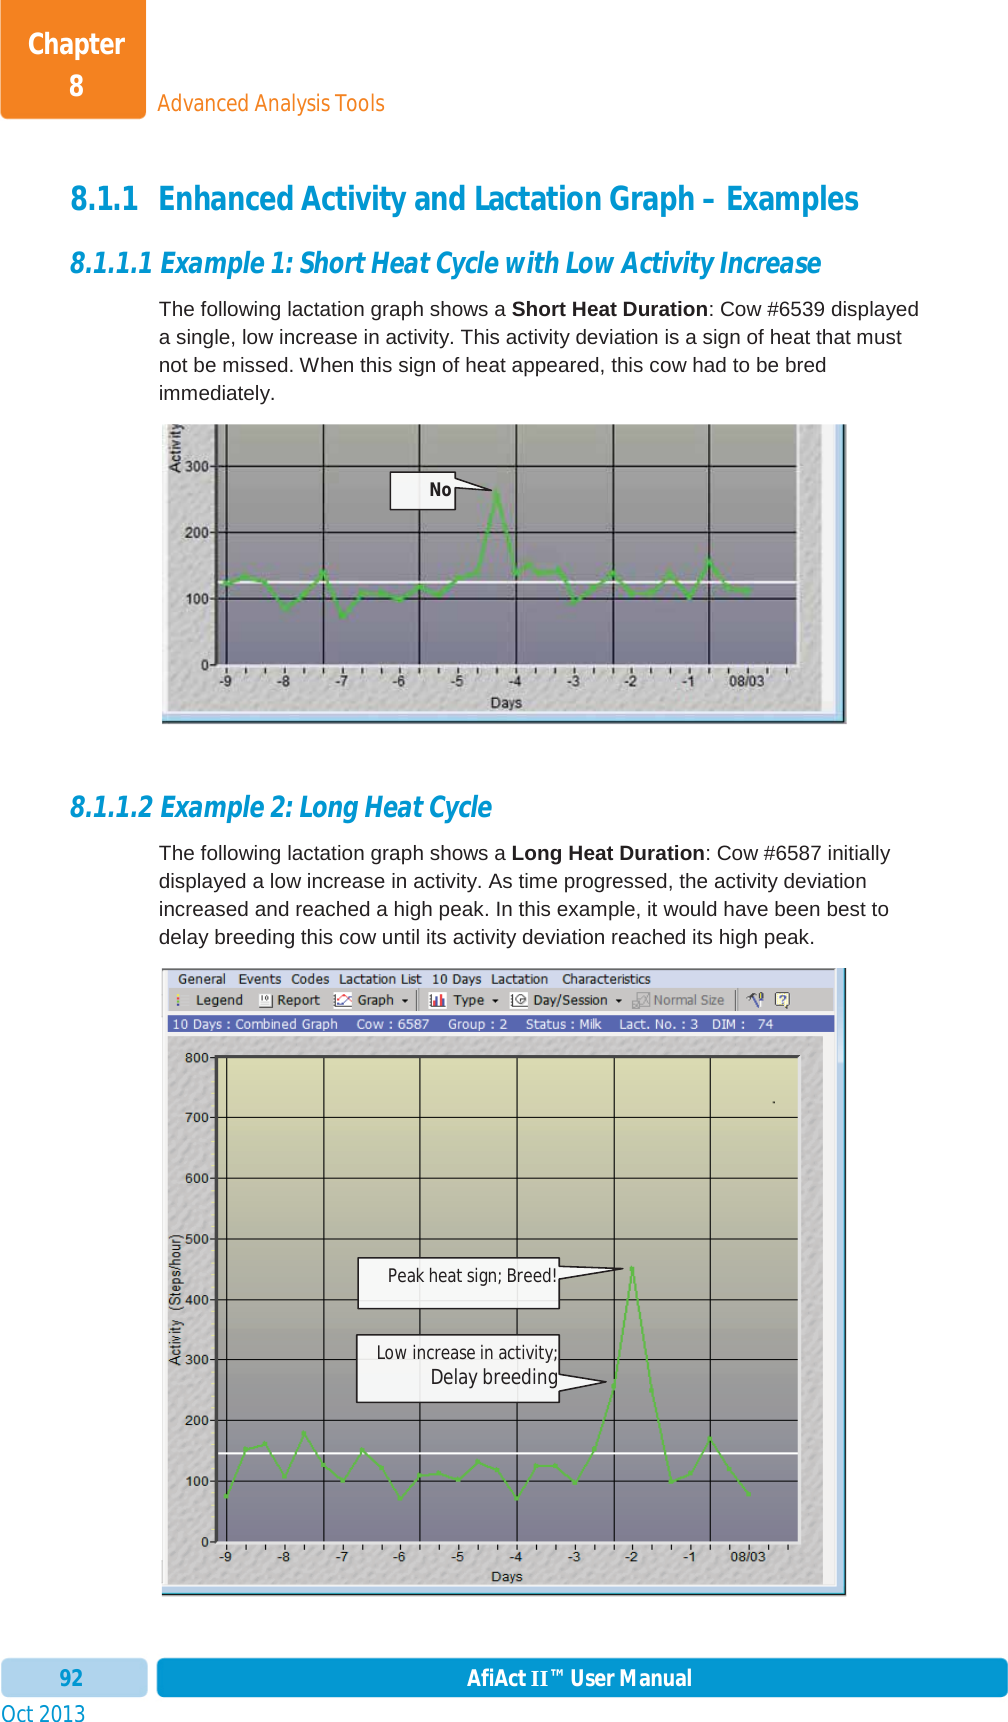 Oct 2013 AfiAct II™ User Manual92Advanced Analysis ToolsChapter 88.1.1 Enhanced Activity and Lactation Graph – Examples 8.1.1.1 Example 1: Short Heat Cycle with Low Activity Increase The following lactation graph shows a Short Heat Duration: Cow #6539 displayed a single, low increase in activity. This activity deviation is a sign of heat that must not be missed. When this sign of heat appeared, this cow had to be bred immediately. 8.1.1.2 Example 2: Long Heat Cycle  The following lactation graph shows a Long Heat Duration: Cow #6587 initially displayed a low increase in activity. As time progressed, the activity deviation increased and reached a high peak. In this example, it would have been best to delay breeding this cow until its activity deviation reached its high peak. NoPeak heat sign; Breed!Low increase in activity; Delay breeding